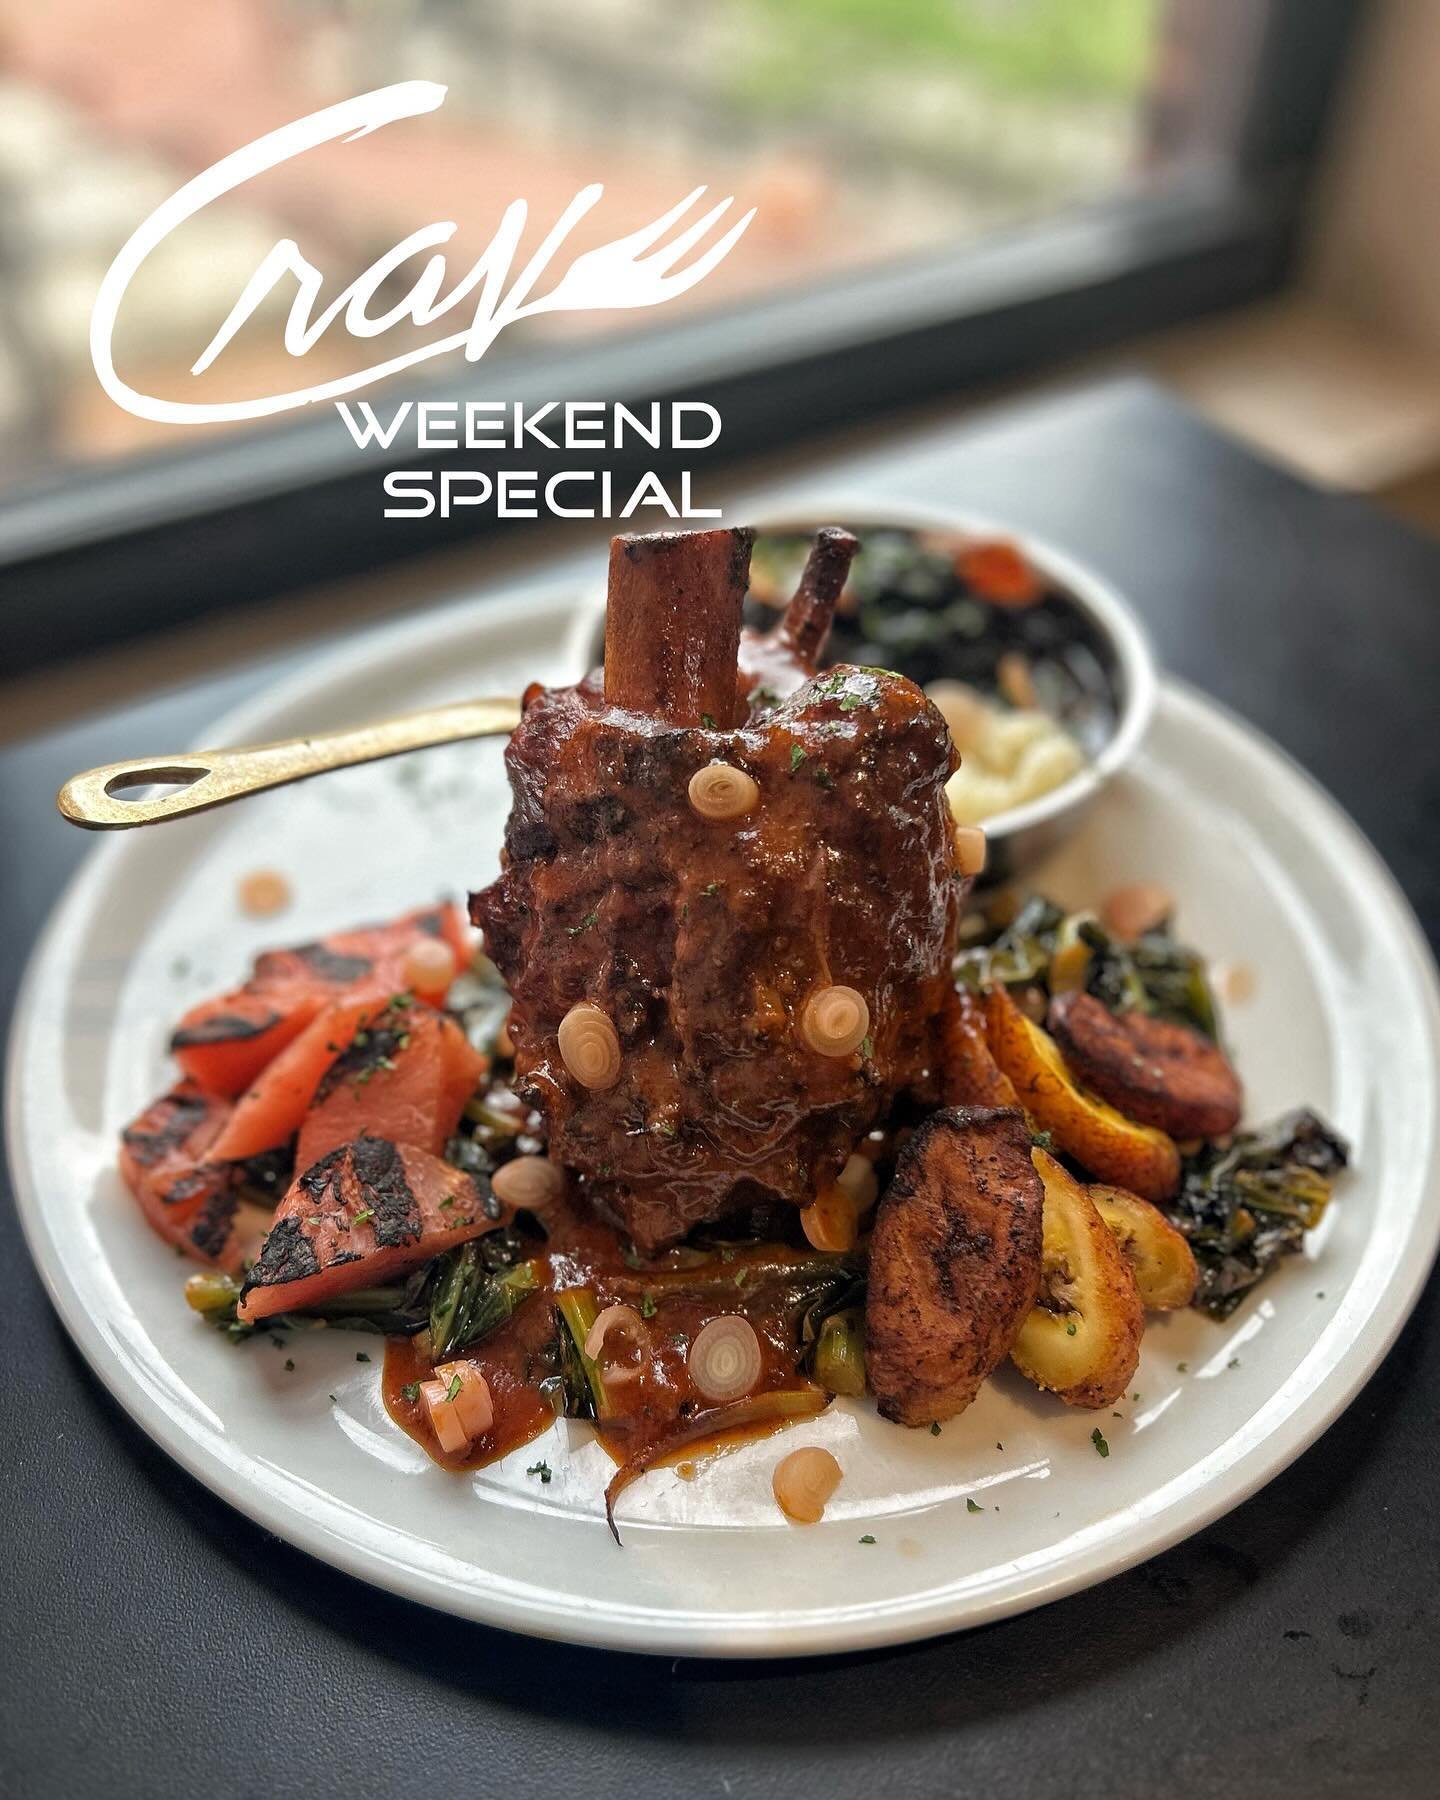 Savor the weekend with our mouthwatering special: Braised Pork Al Pastor at Crave! Indulge in slow-cooked pork shank bathed in pineapple guajillo broth, served with white rice, stewed black beans, pink pineapple, fried plantains, and cerveza-braised 